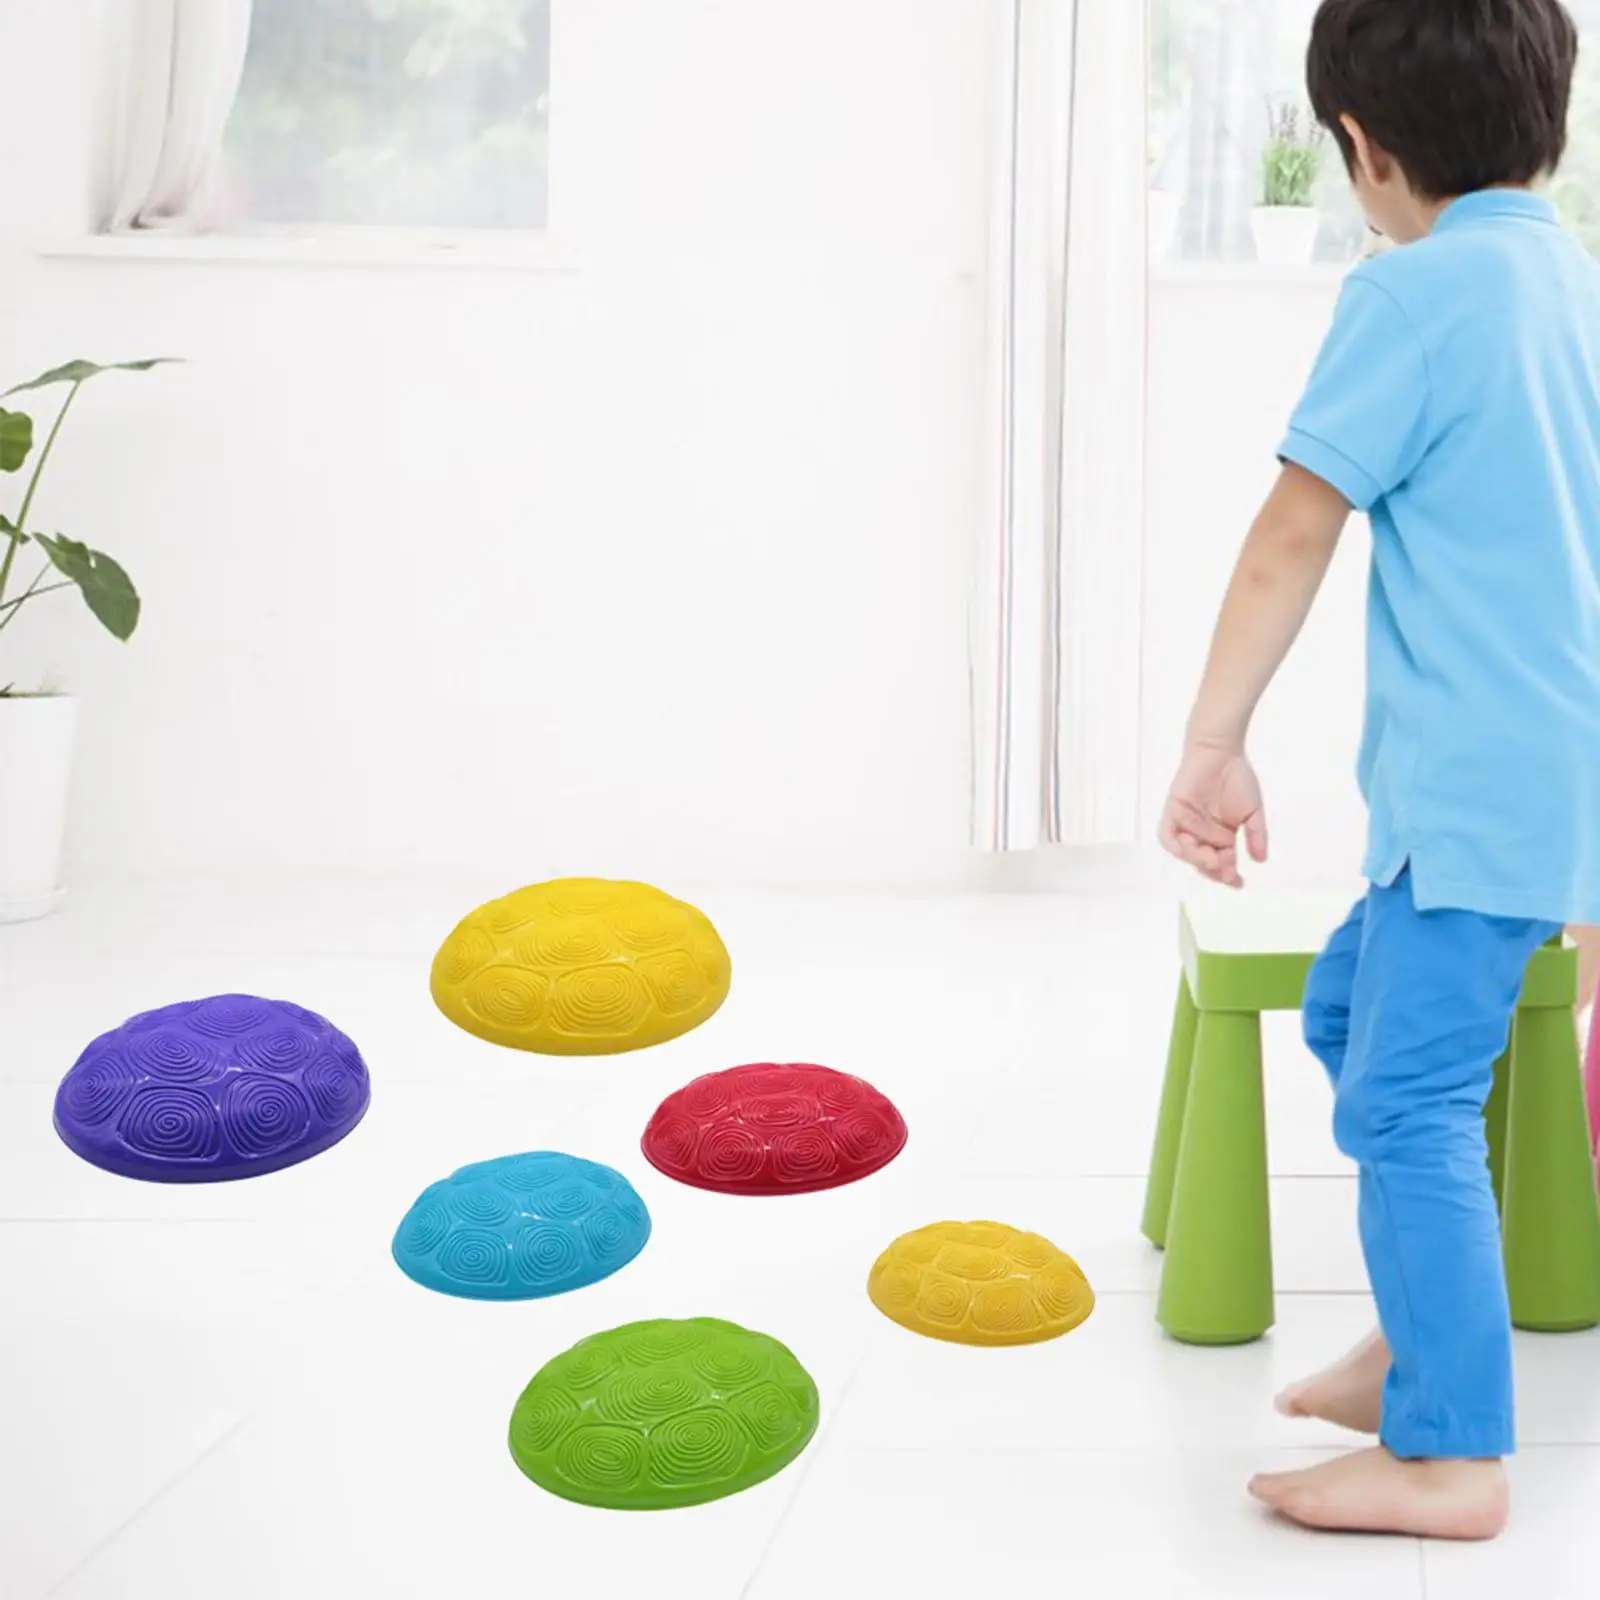 6x Balance Stepping stone Obstacle Course Crossing River stone Play Equipment Coordination ,Sensory Toys Durable for Indoor